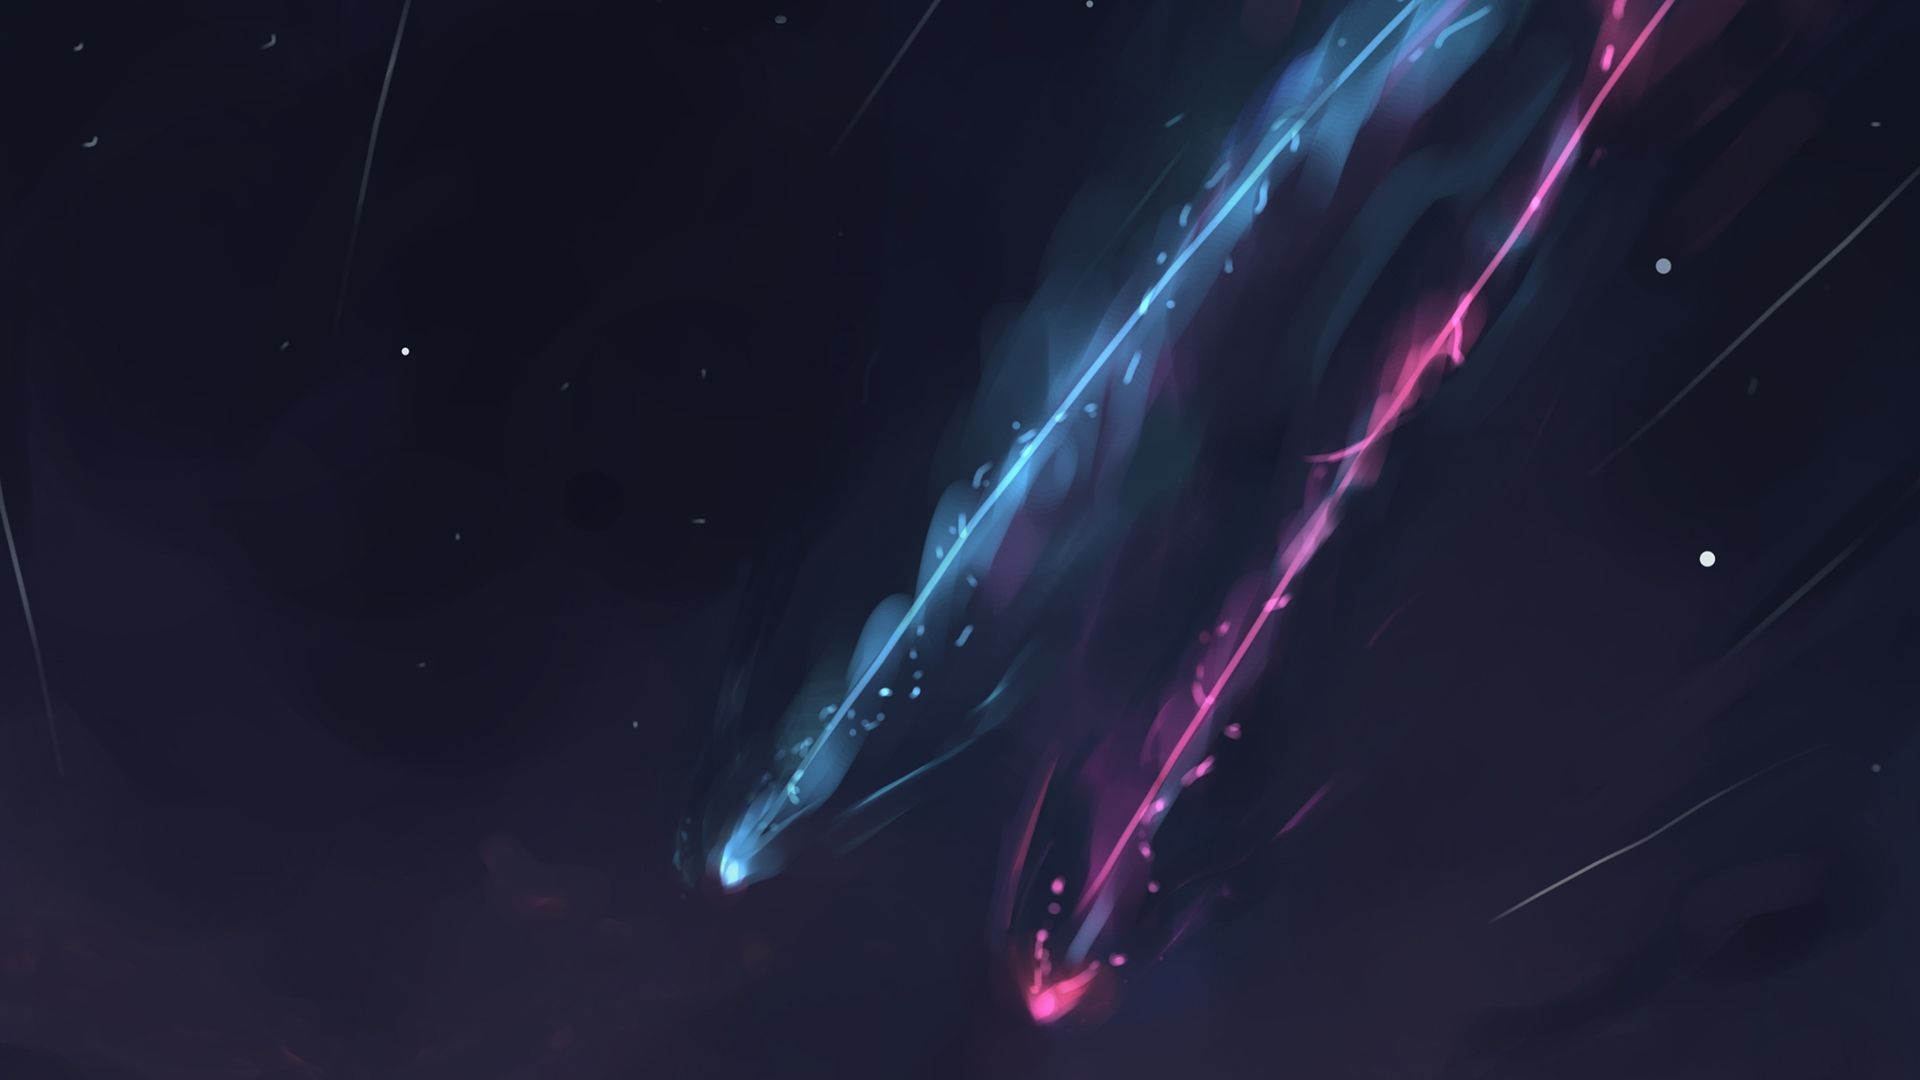 Your Name Anime Abstract Painting Wallpaper, HD Abstract 4K